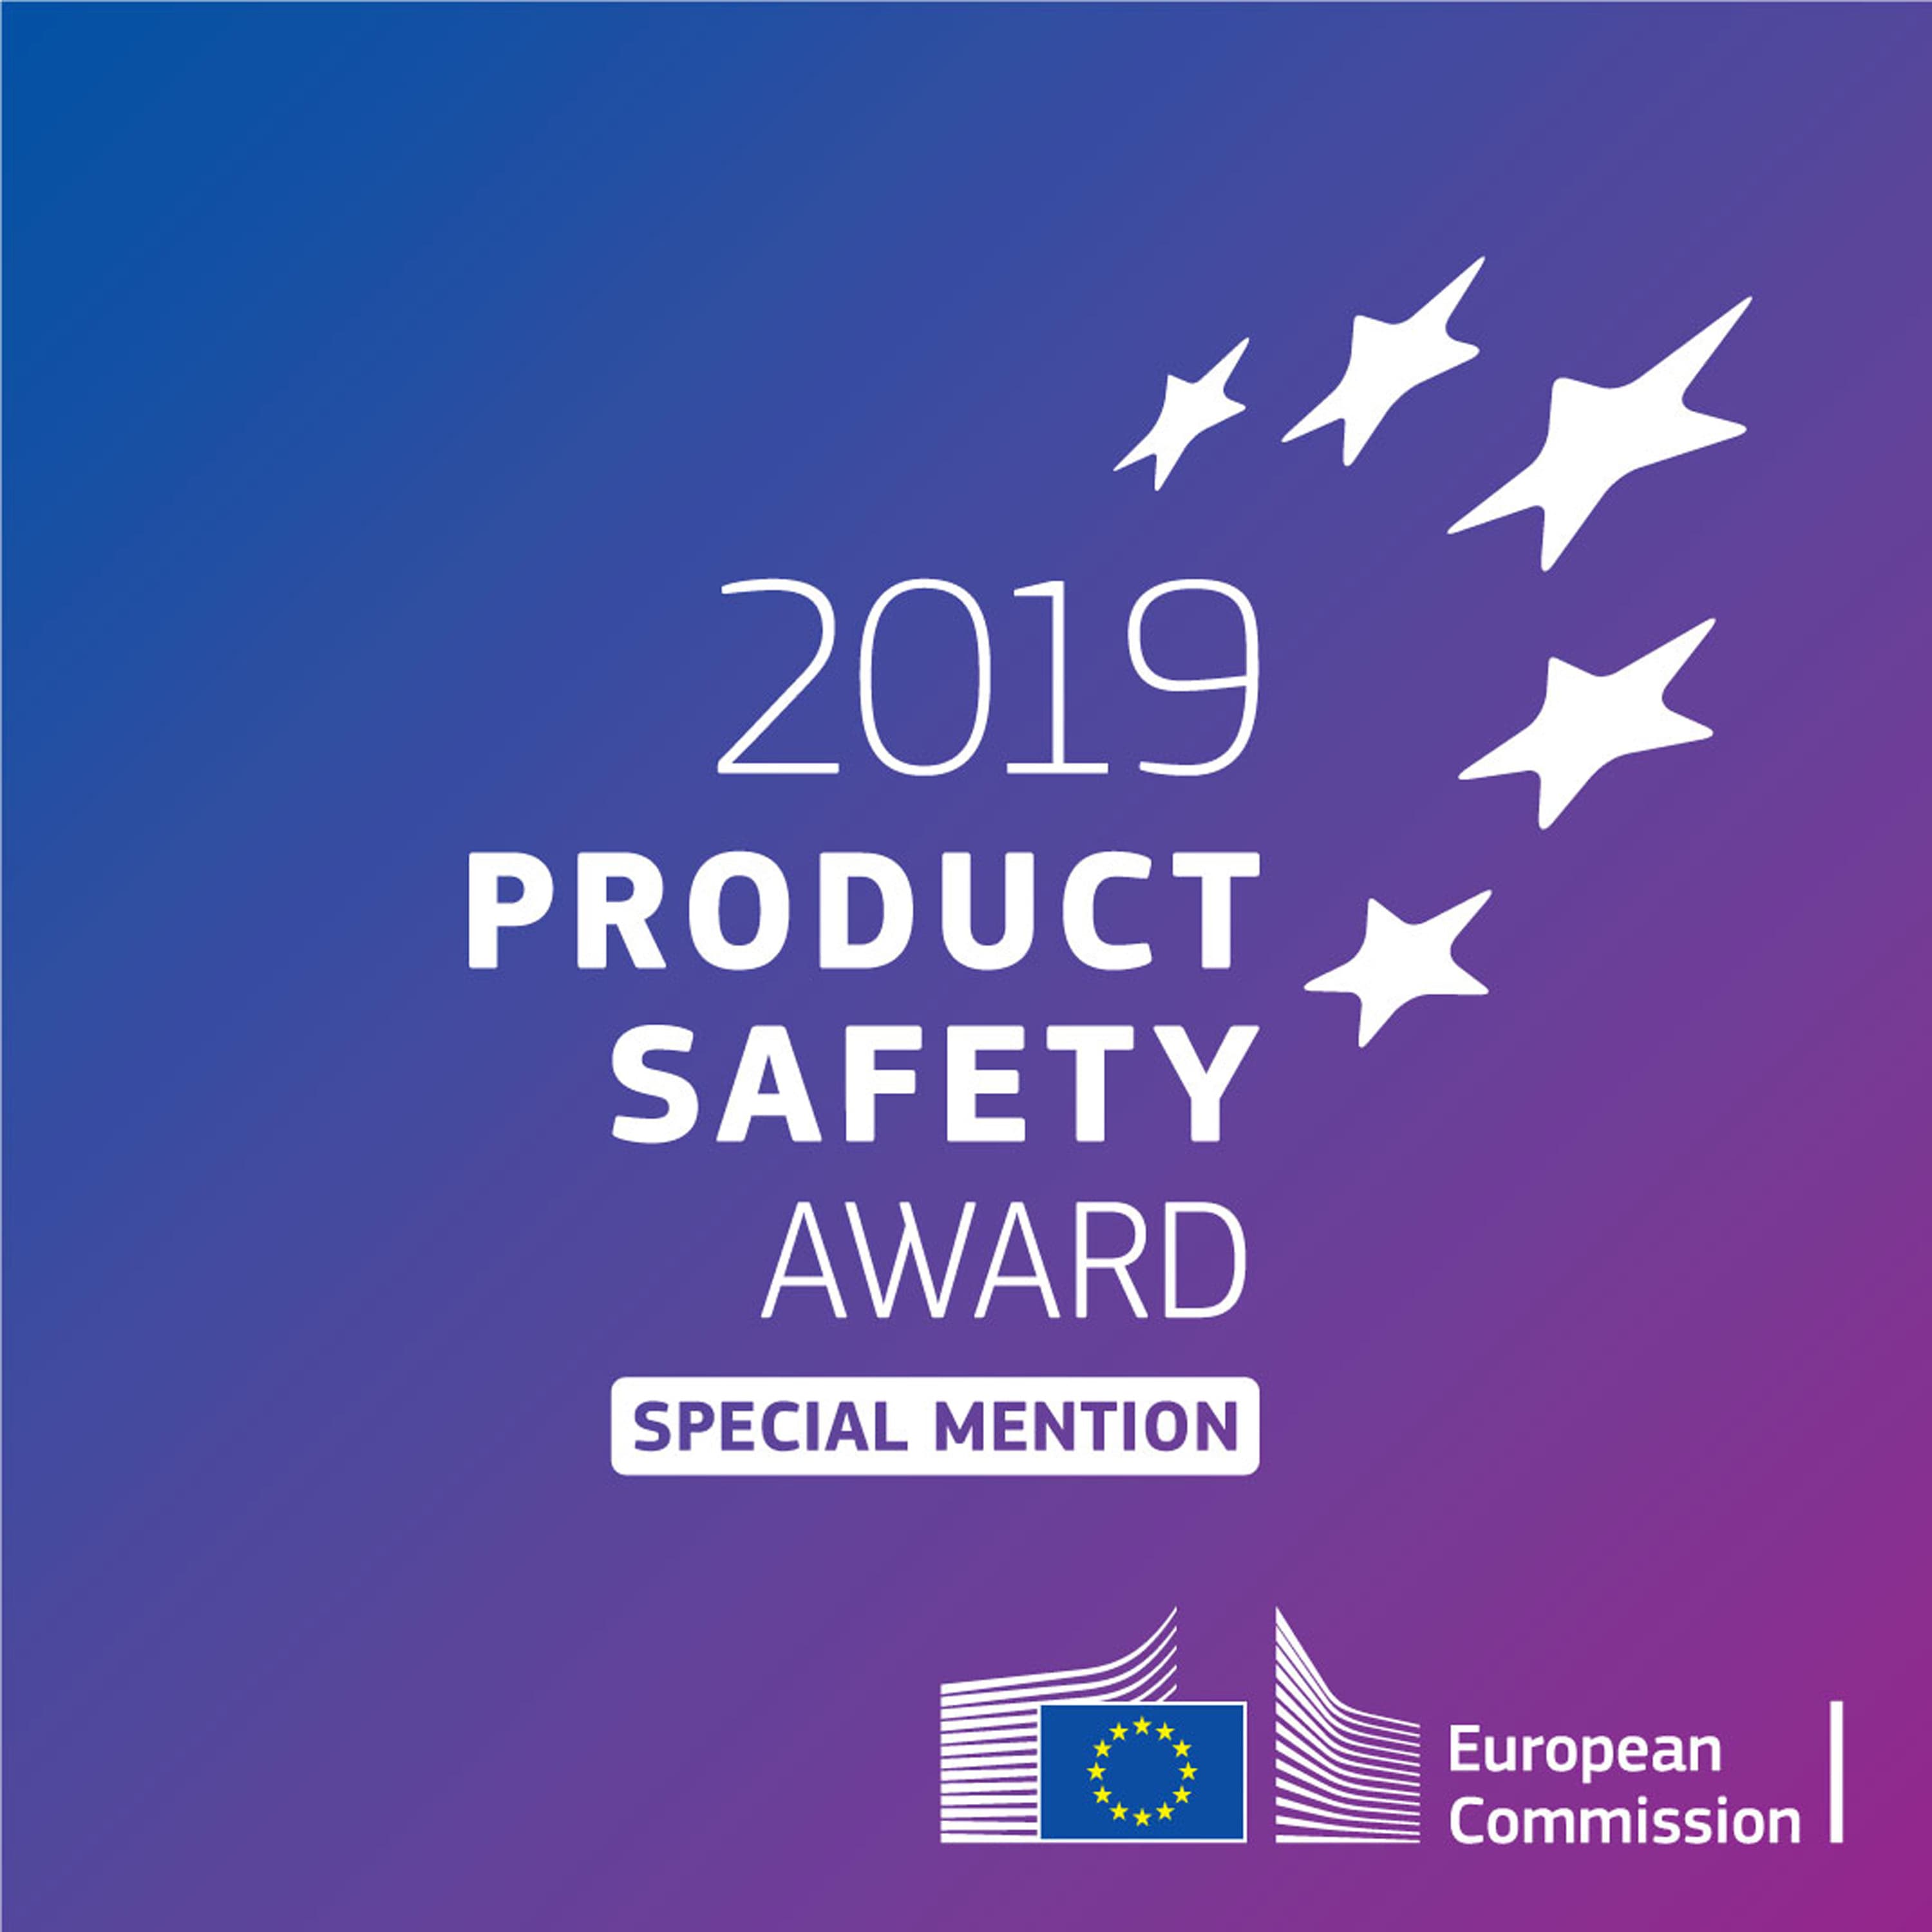 HONORED WITH THE EU PRODUCT SAFETY AWARD 2019